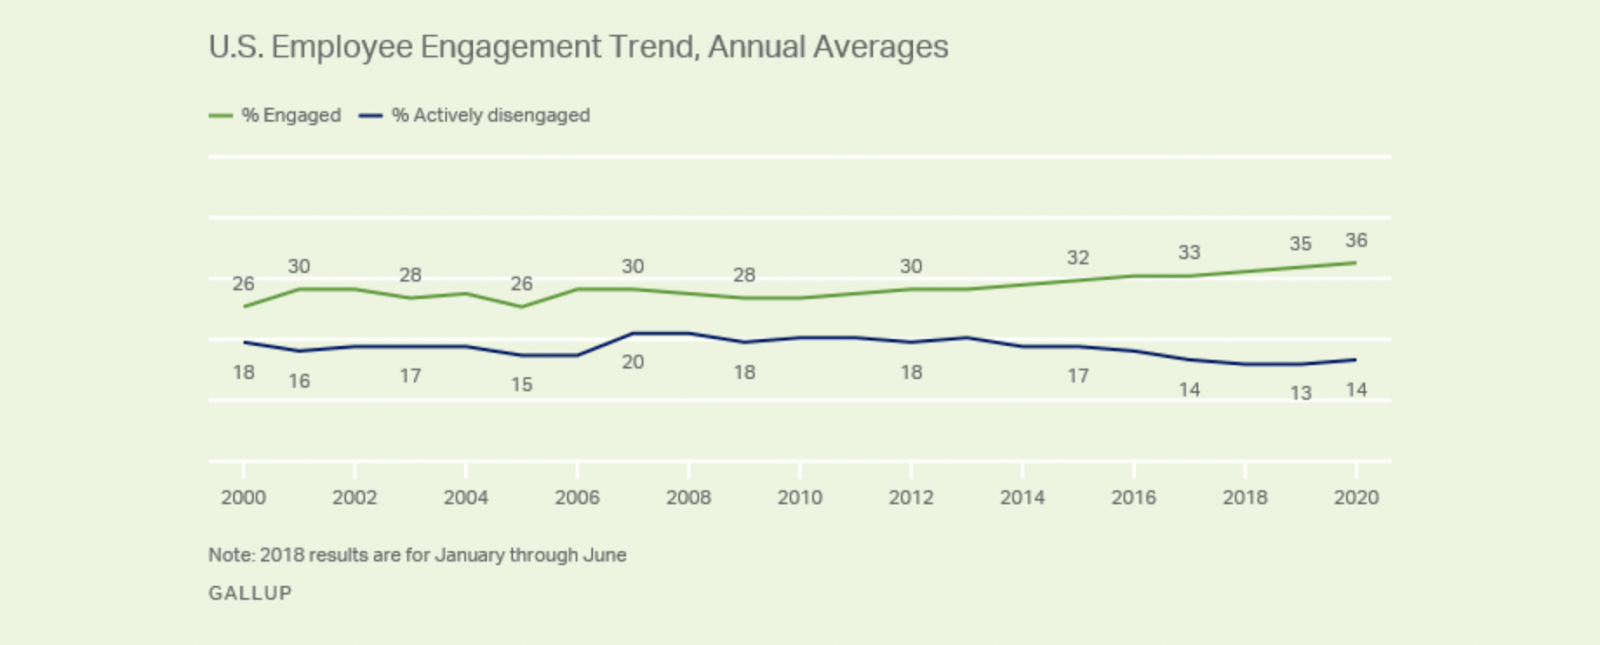 Gallup’s latest figures show a slight increase in both engaged and actively disengaged employees. 